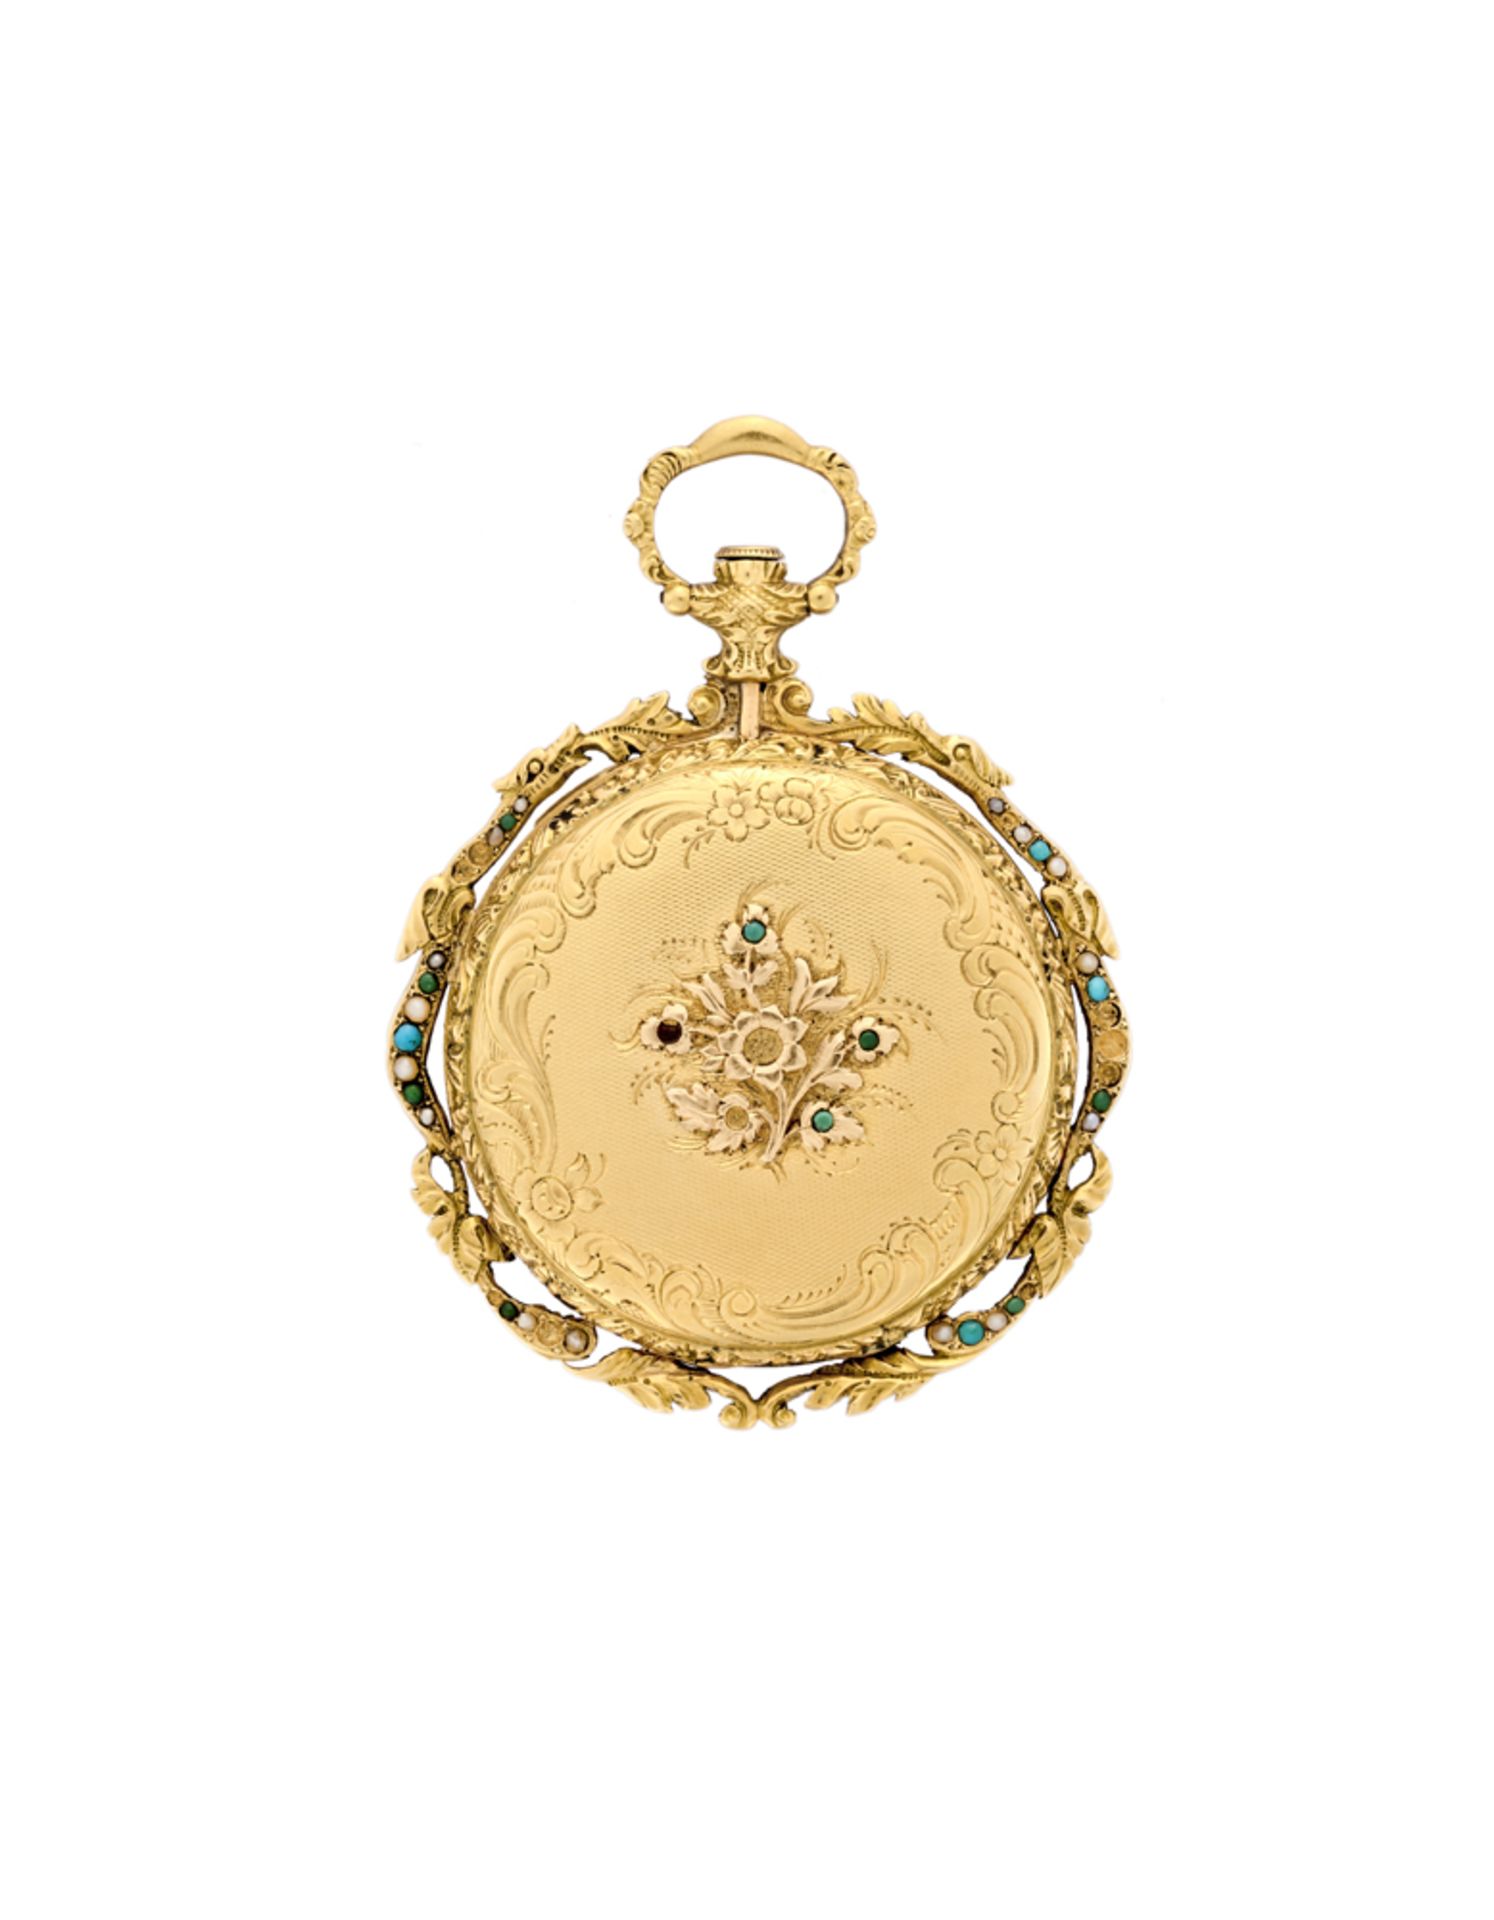 ALLEGRONE & EMERYLady's 18K gold pocket watch with small turquoise19th centuryCase signedKey-wind - Image 2 of 2